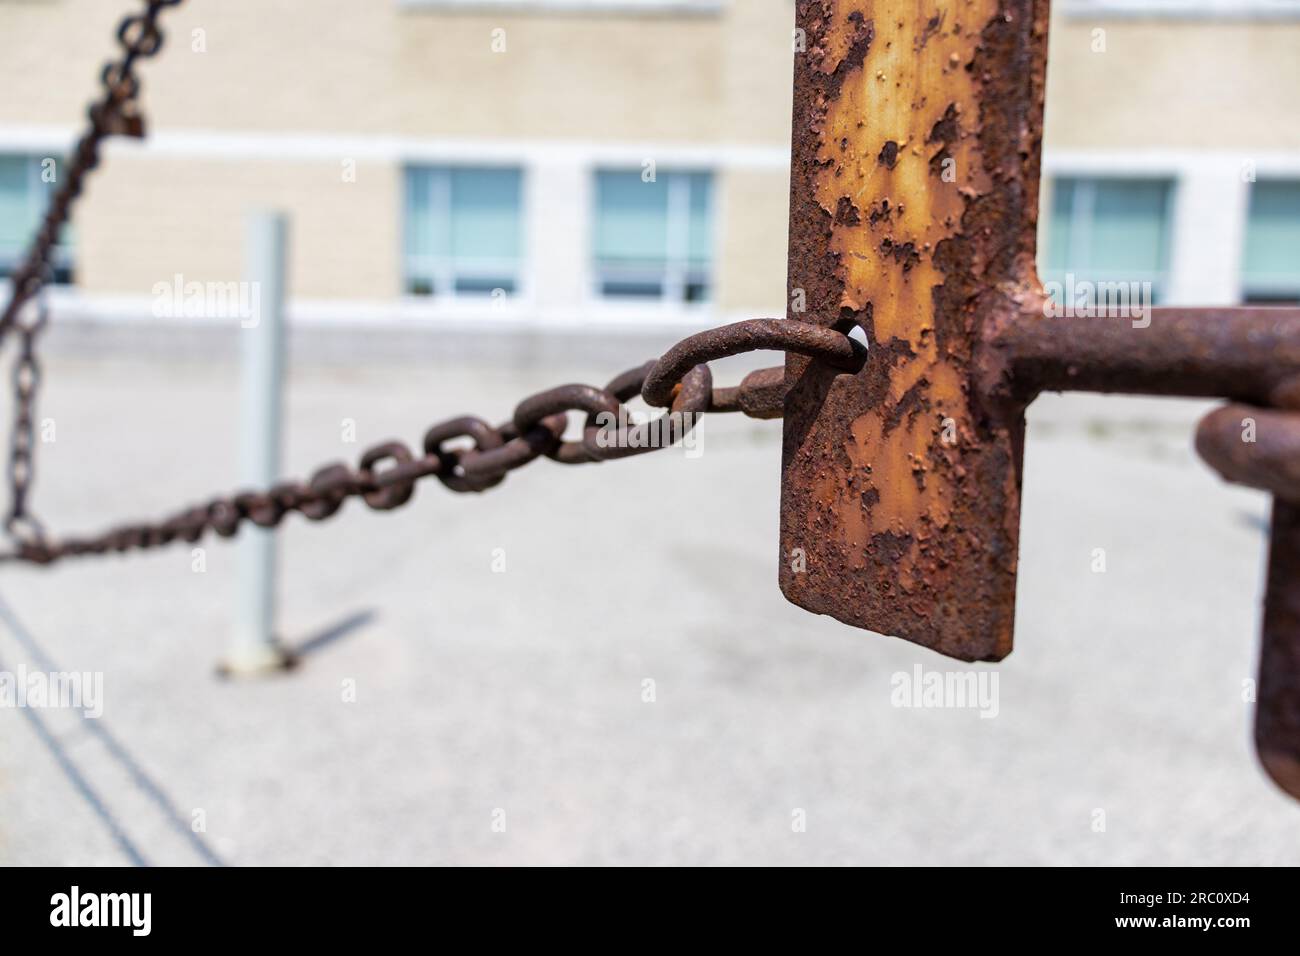 Rusted metal chain fence gate - blurred background. Taken in Toronto, Canada. Stock Photo